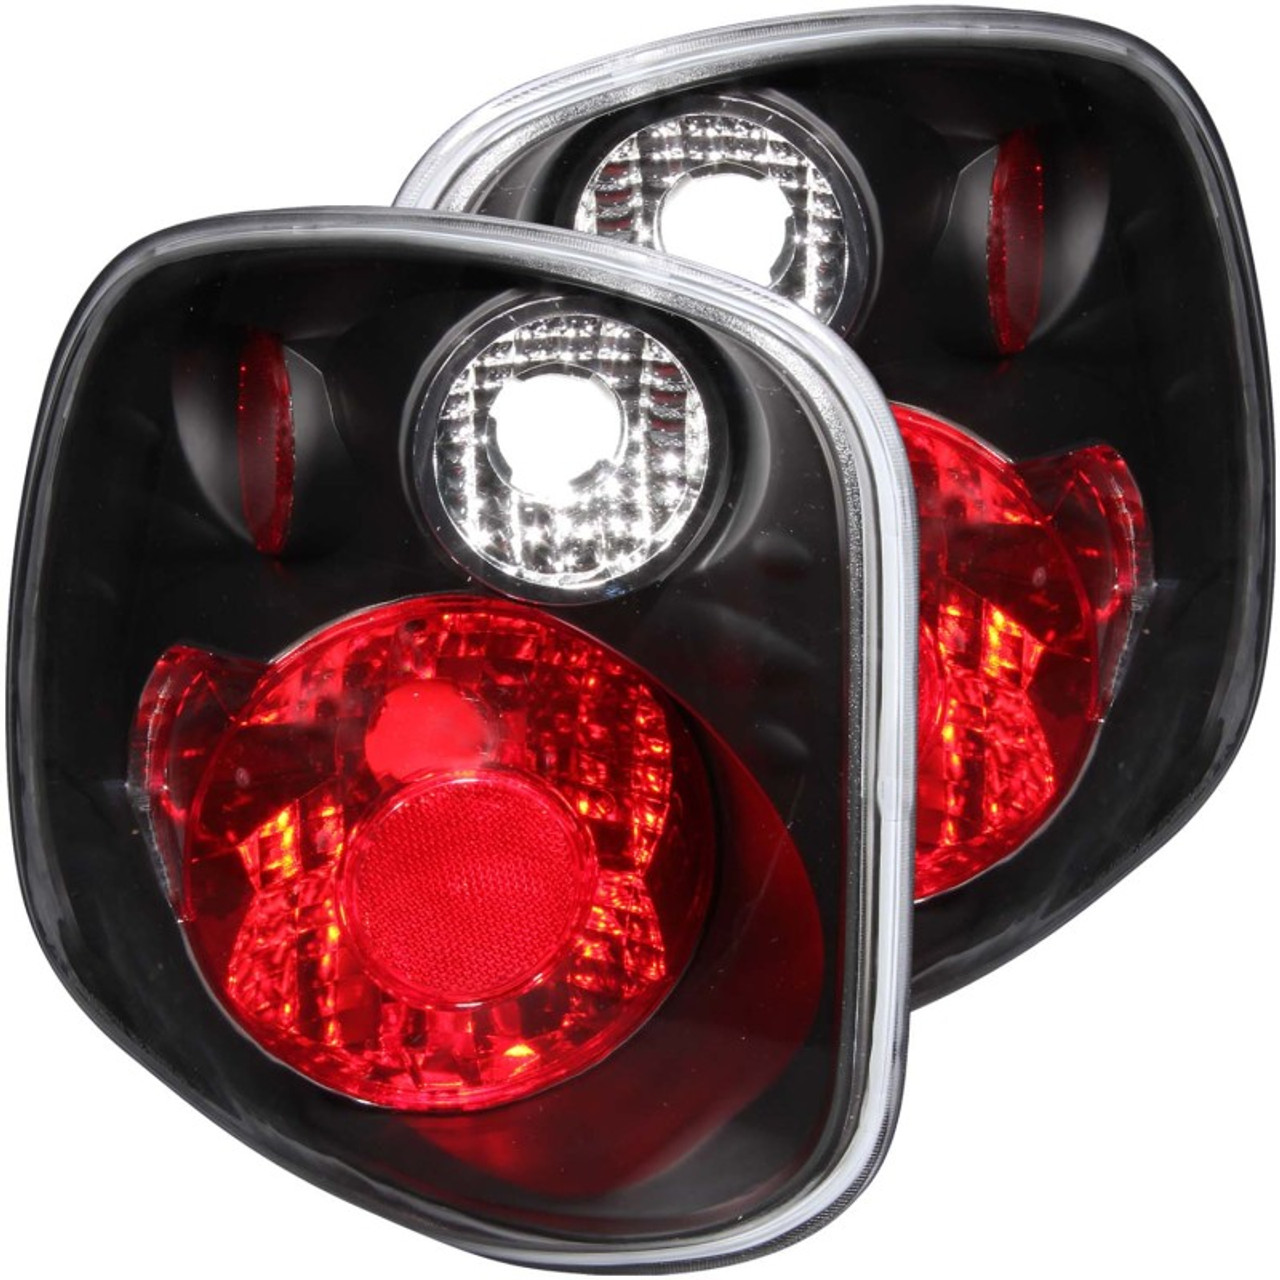 anz211062 ANZO for 1989-1996 Ford for F-150 Taillights Black